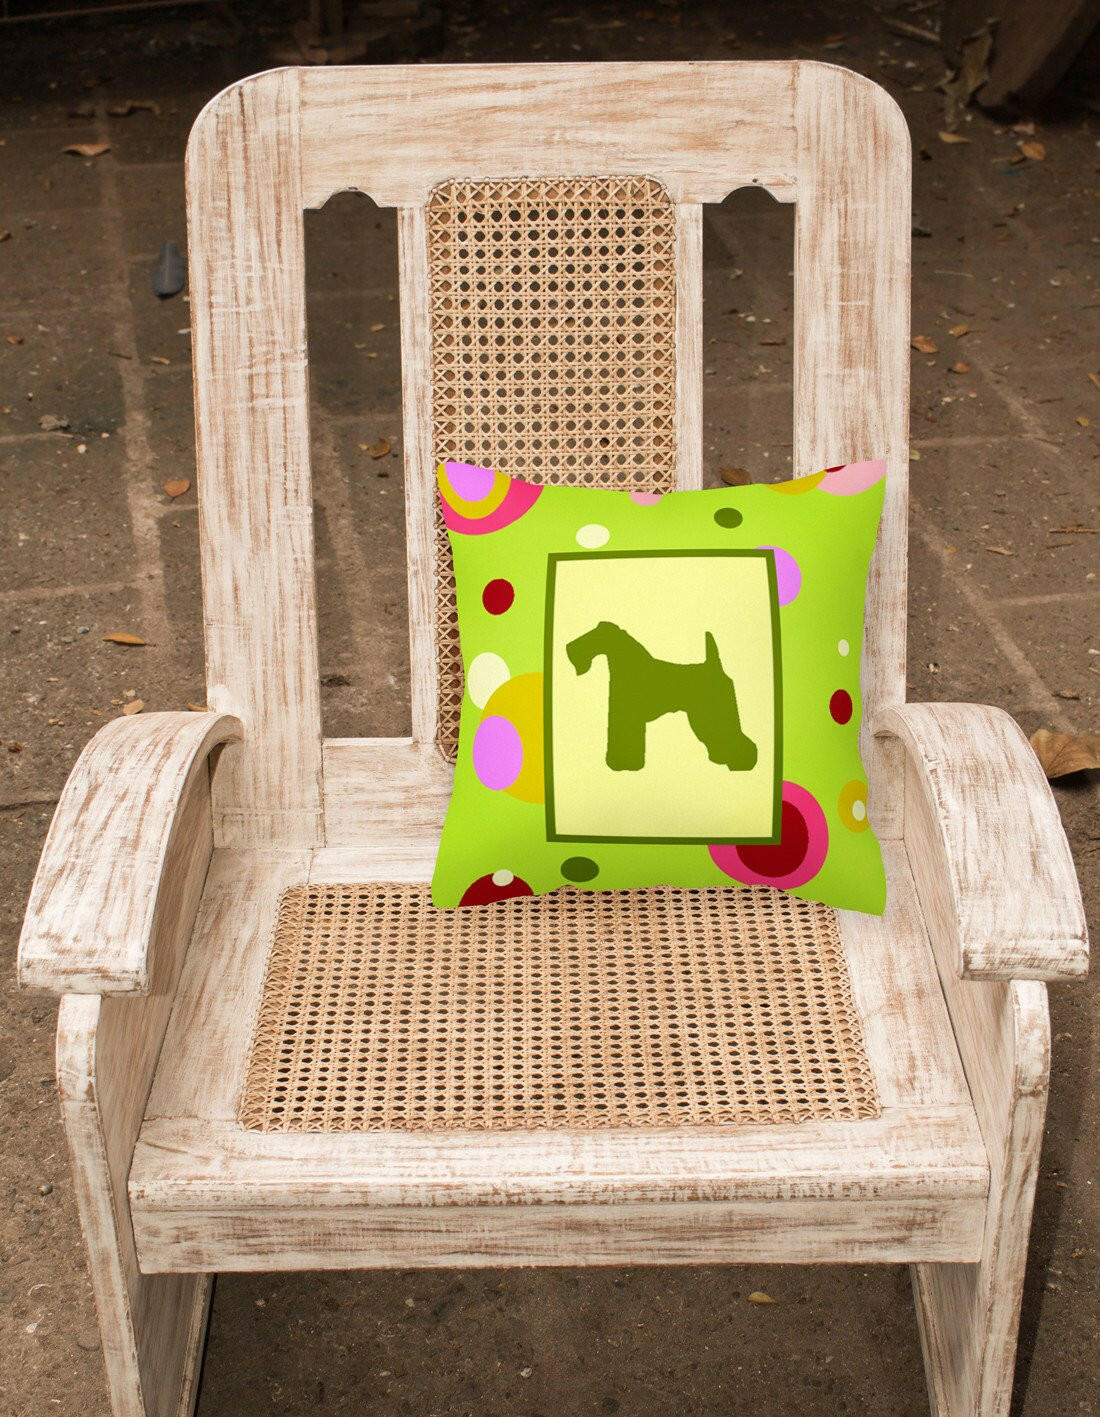 Lime Green Dots Kerry Blue Terrier Fabric Decorative Pillow CK1042PW1414 by Caroline's Treasures